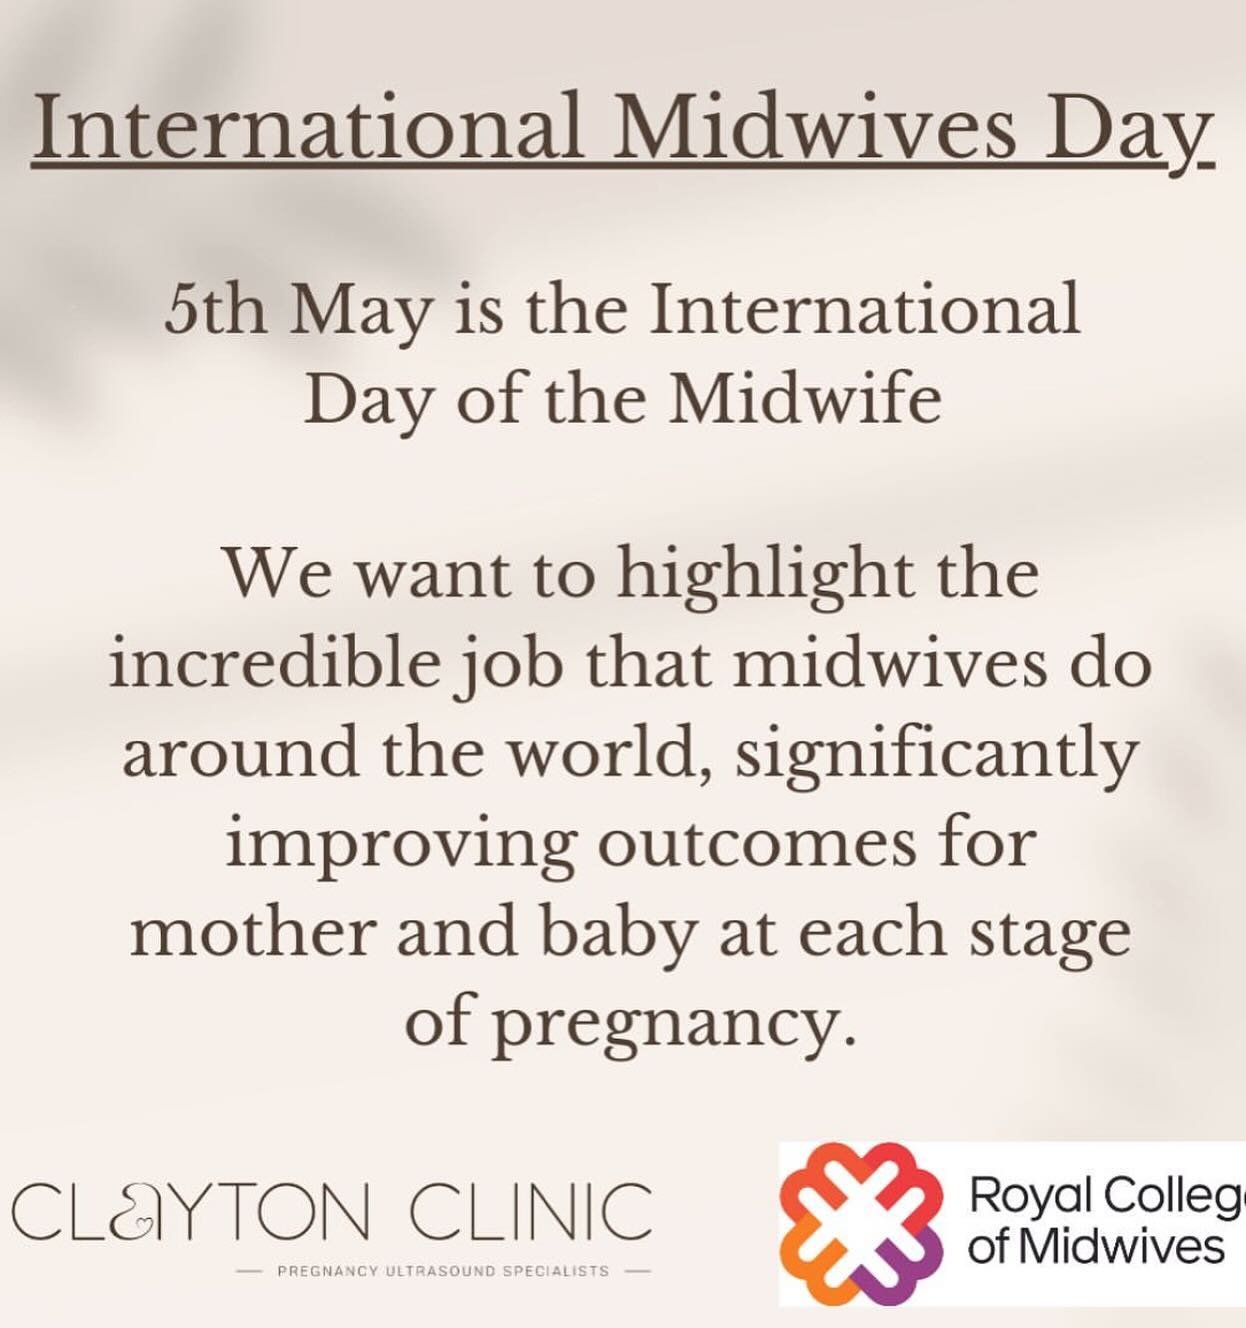 👩🏻&zwj;⚕️International Day of the Midwife - 5th May👩🏻&zwj;⚕️

The International Day of the Midwife has been celebrated since 1991. We think it should have been much sooner - the word midwife dates back to around 1300! Today, there are around 25,0